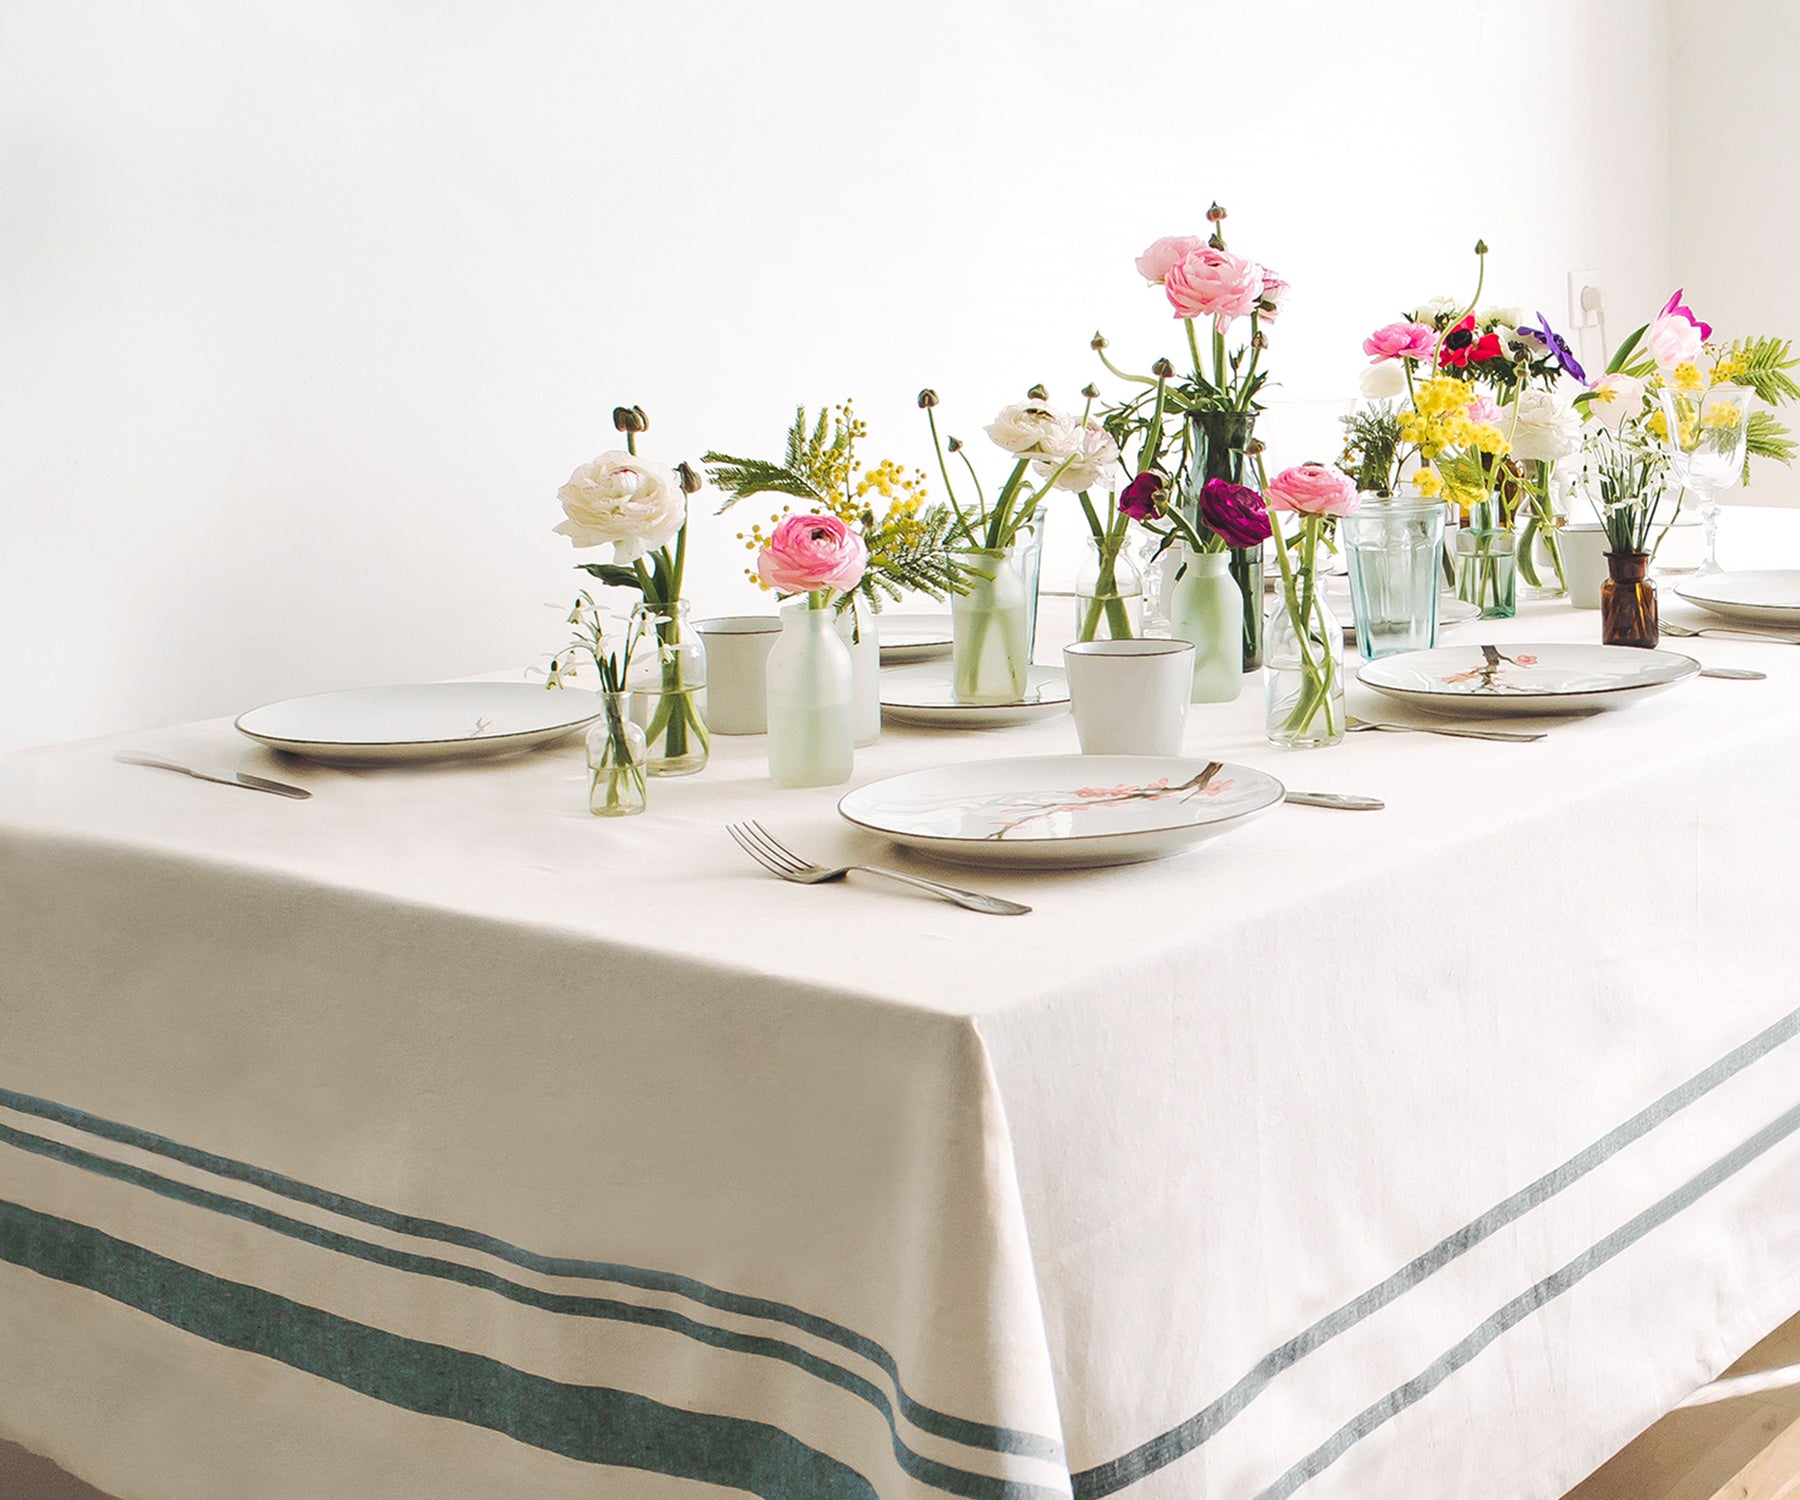 Maximize the Lifespan of Your Tablecloths - 9 Simple Tricks